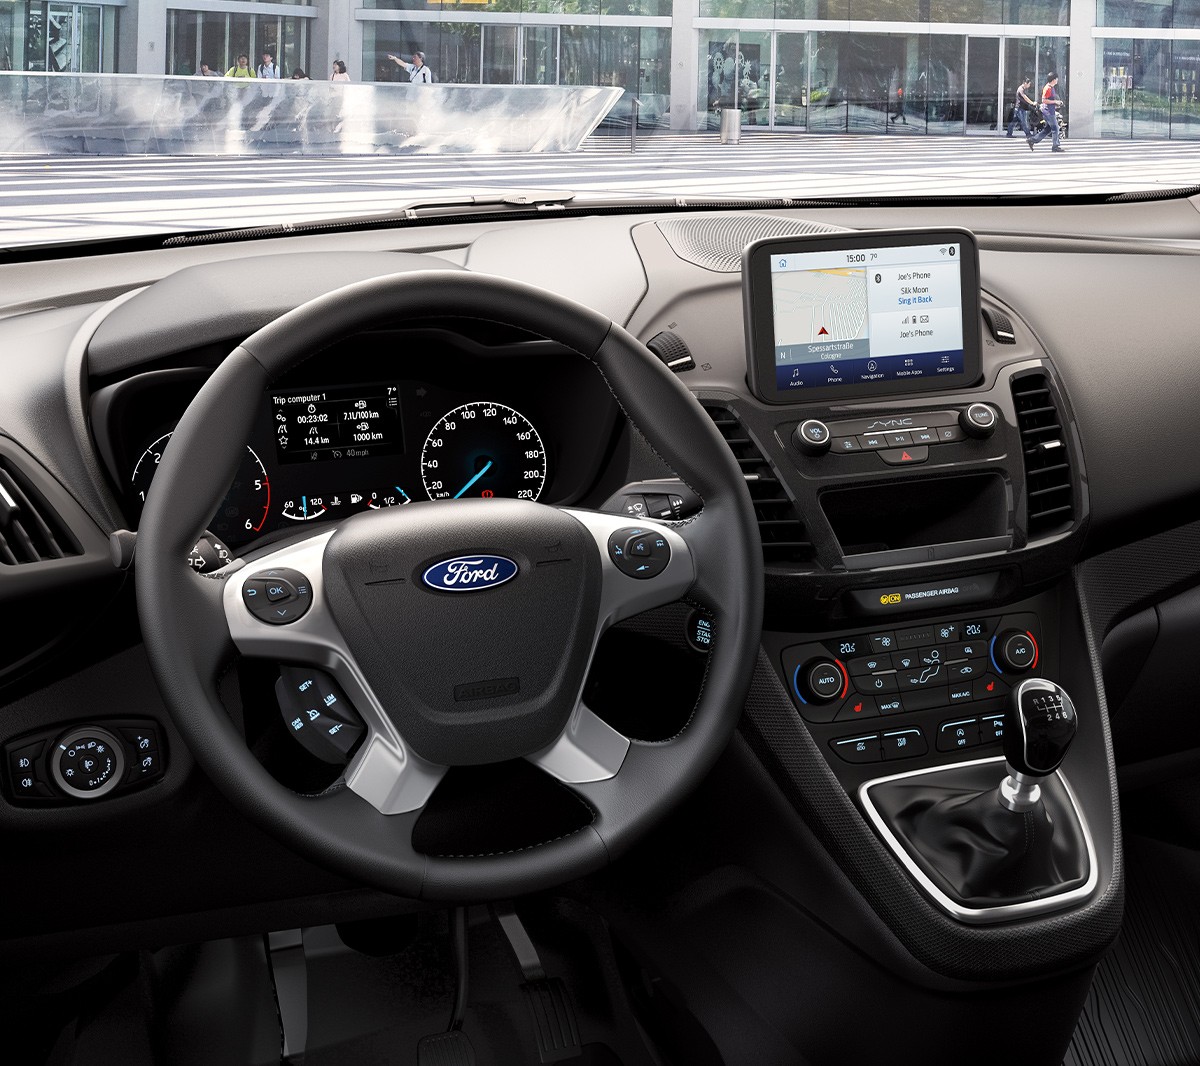 Ford Transit Connect interieur met SYNC 3